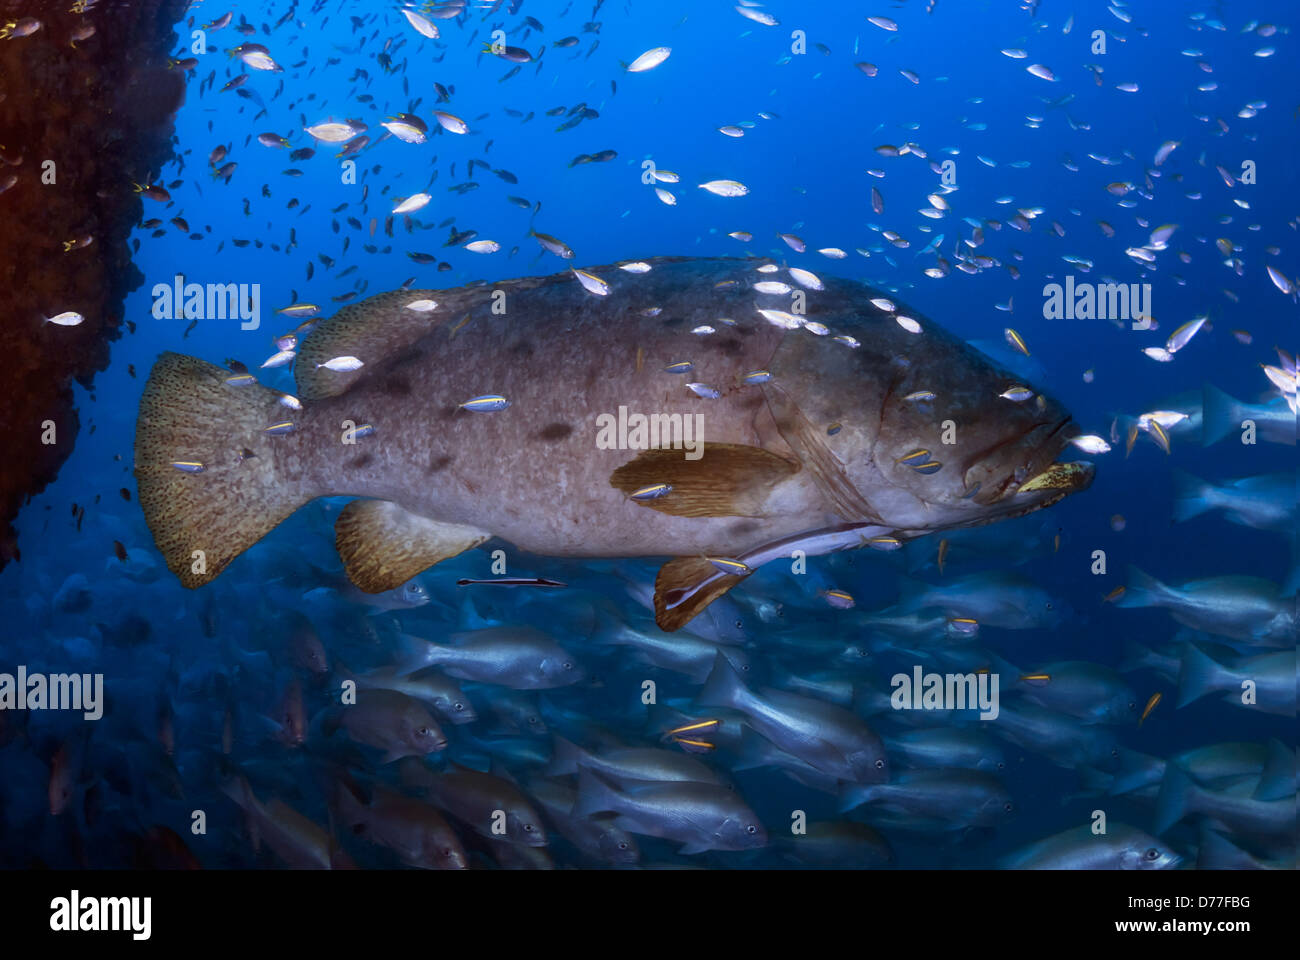 Giant Grouper Epinephelus lanceolatus surrounded by Reef Fish at the SS Yongala Shipwreck on the Great Barrier Reef, Australia Stock Photo